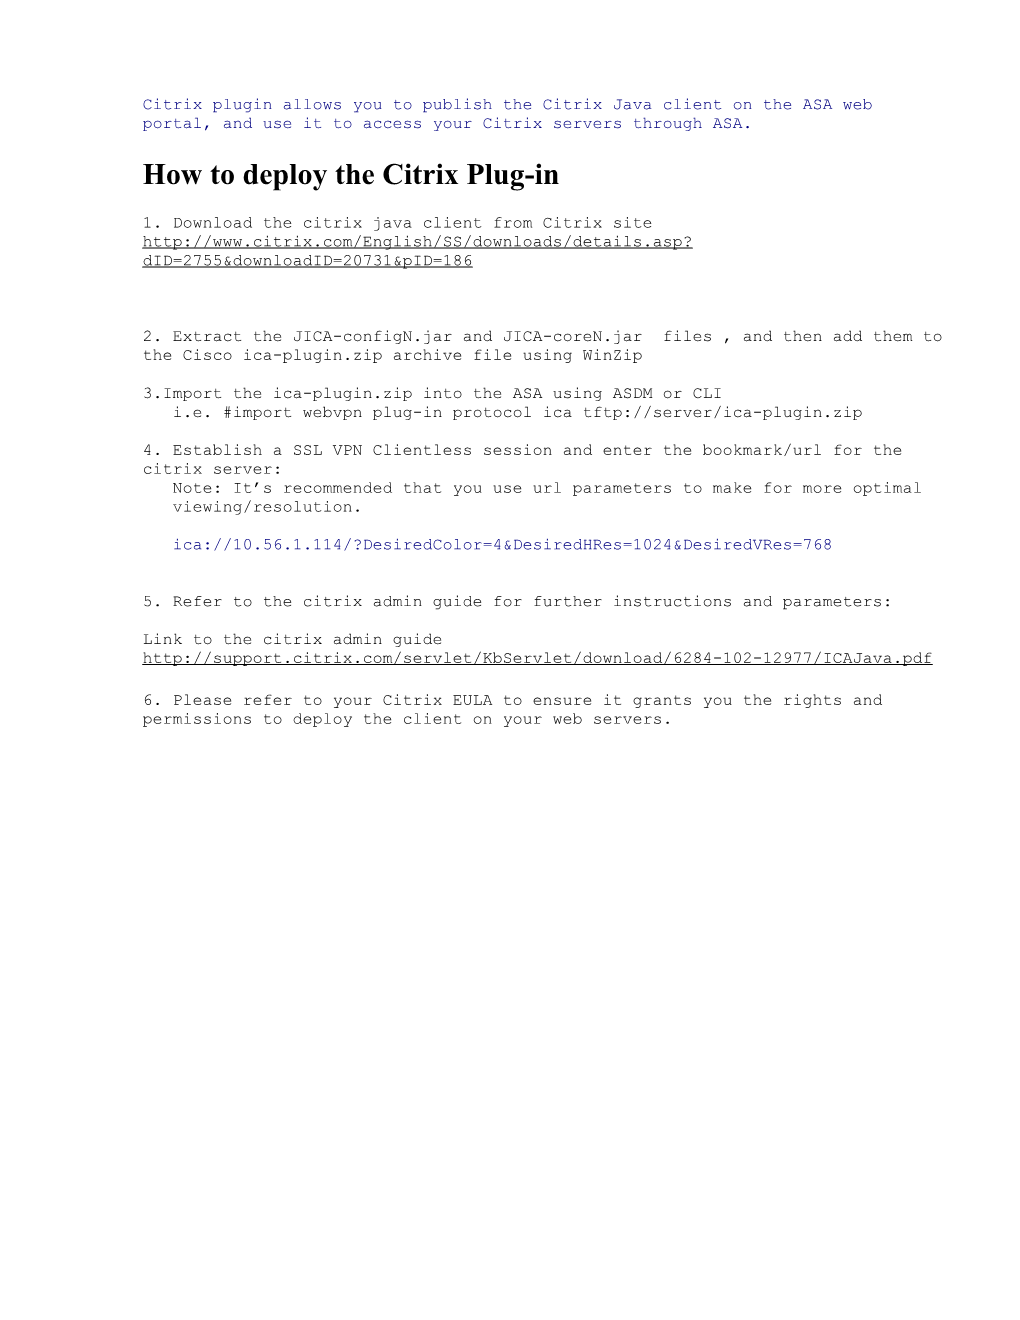 How to Deploy the Citrix Plug-In